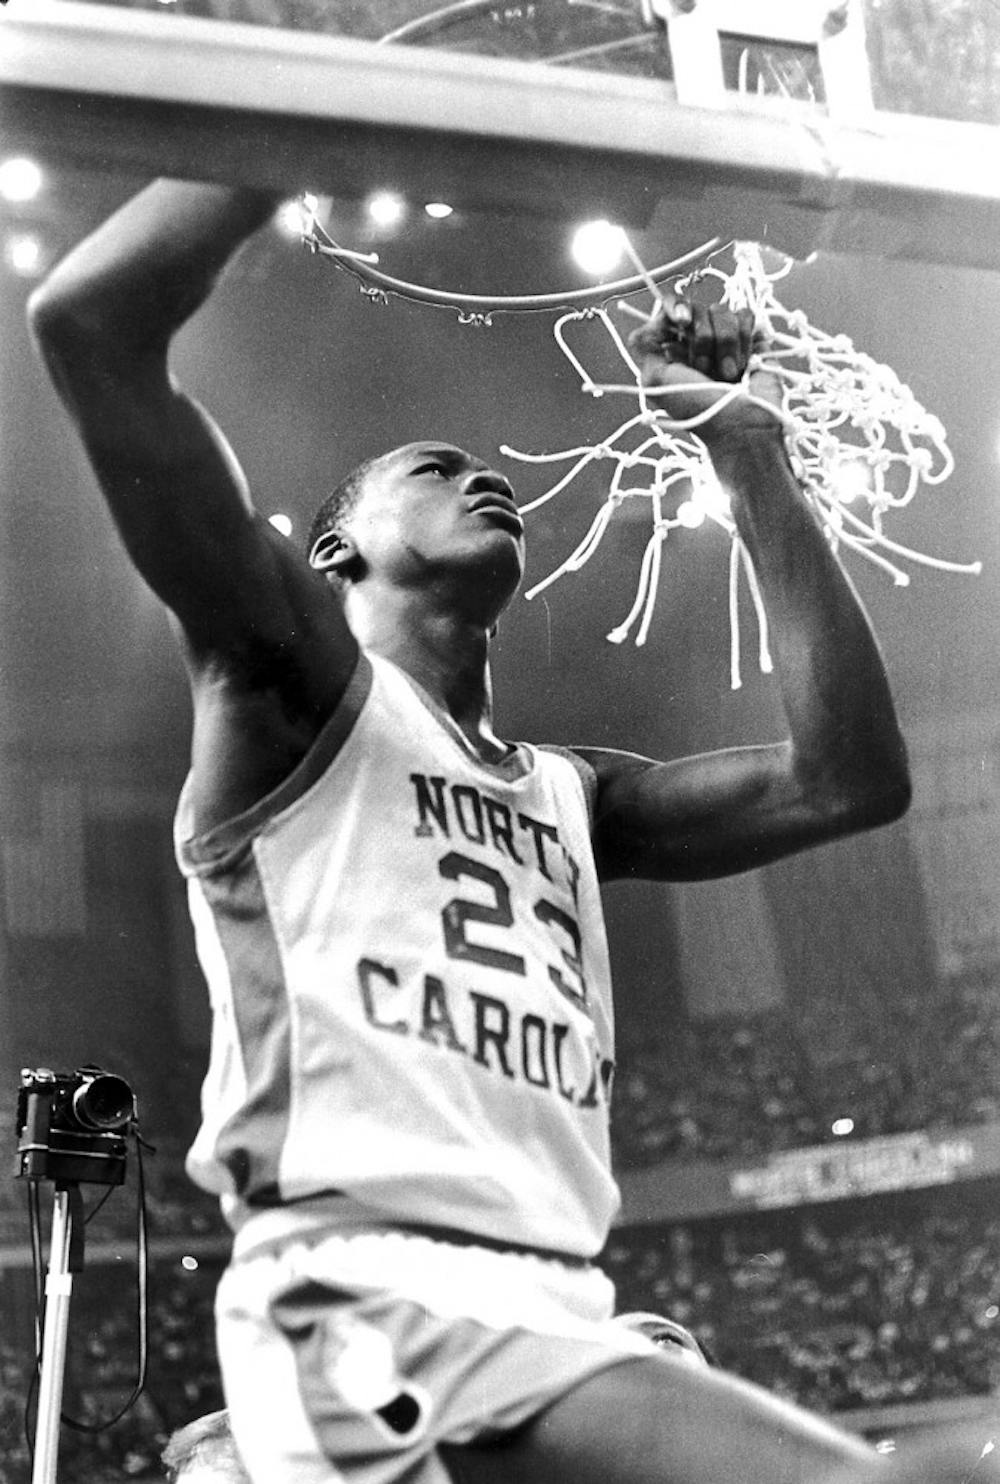 Michael Jordan helps cut down the nets. Courtesy of UNC Athletic Communications